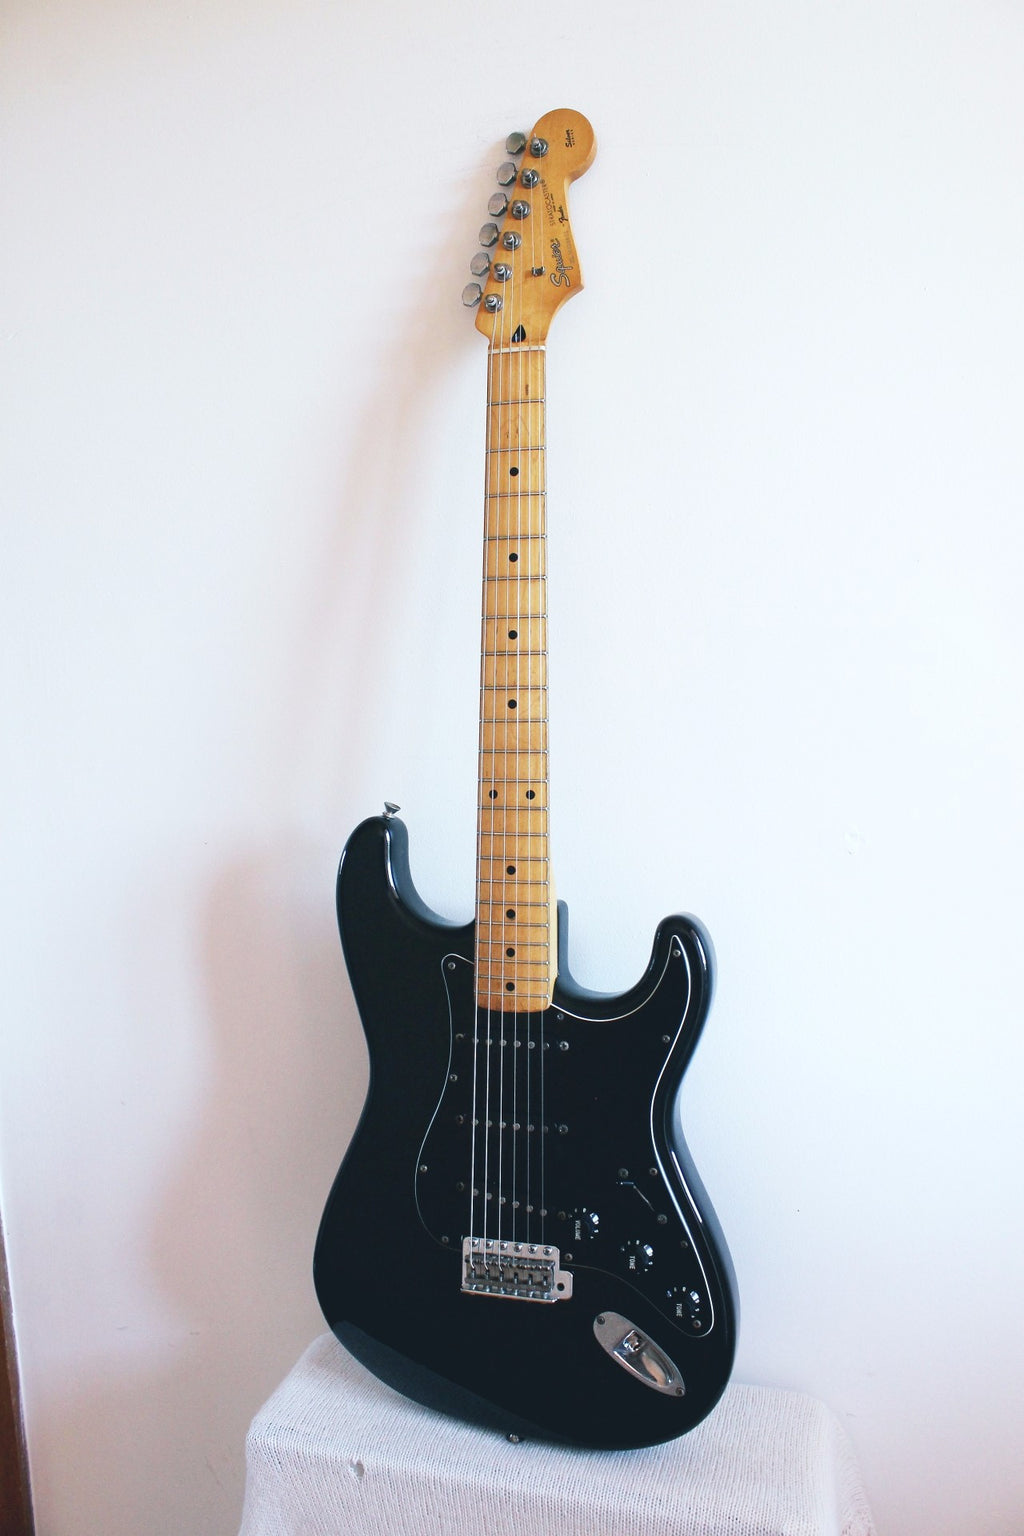 Used Squier Stratocaster Silver Series Black 1992/93